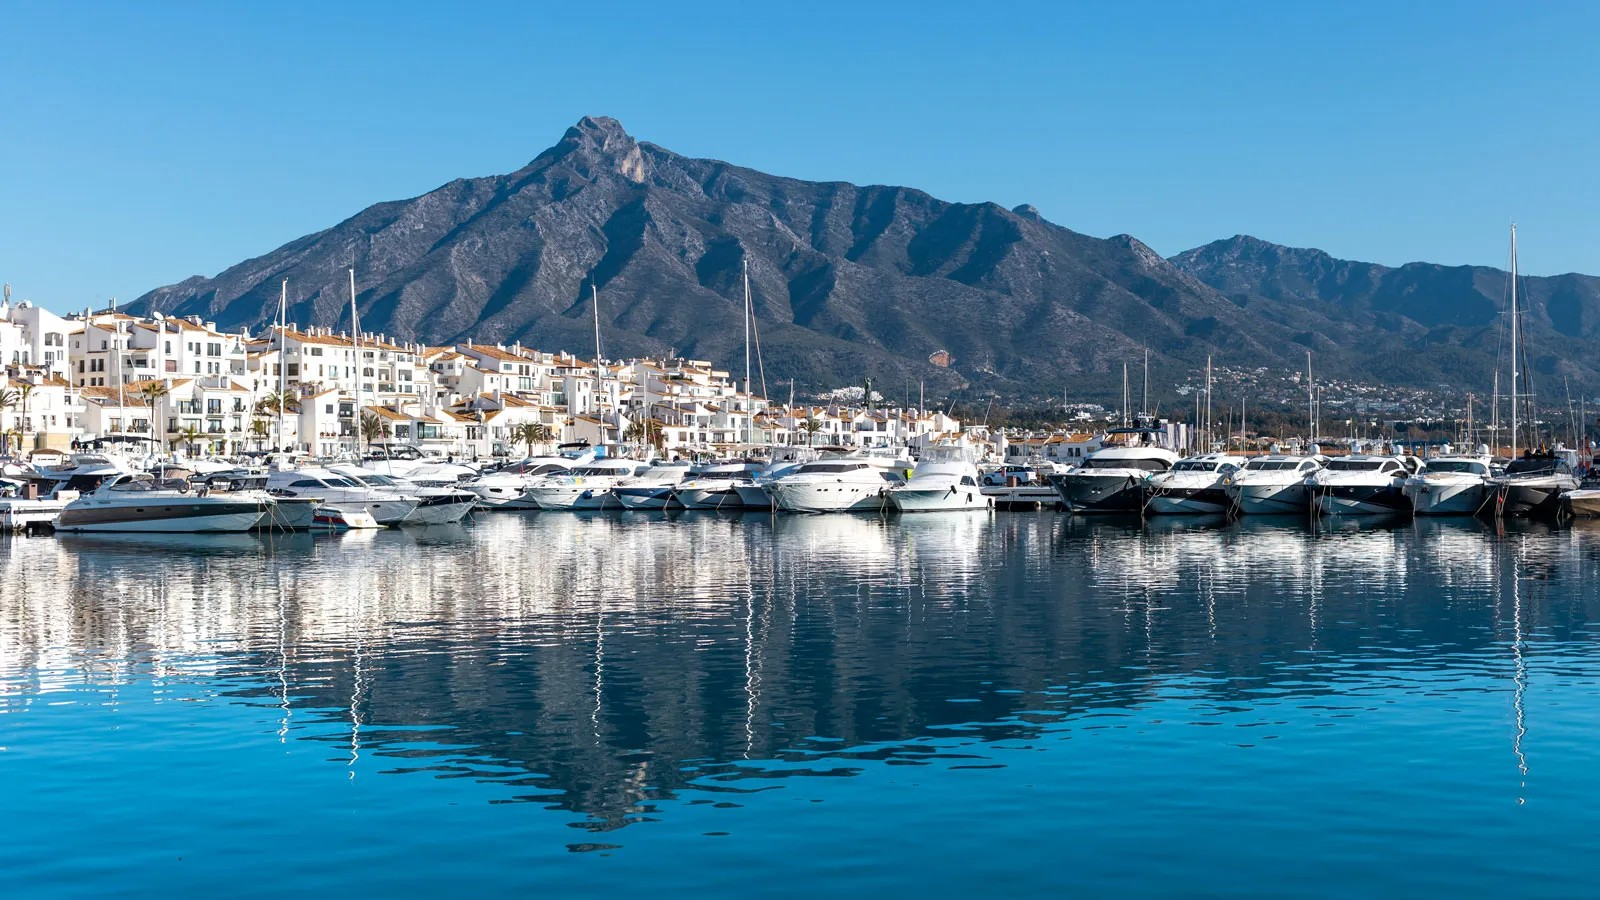 E1, the first all electric boat race in Puerto Banús